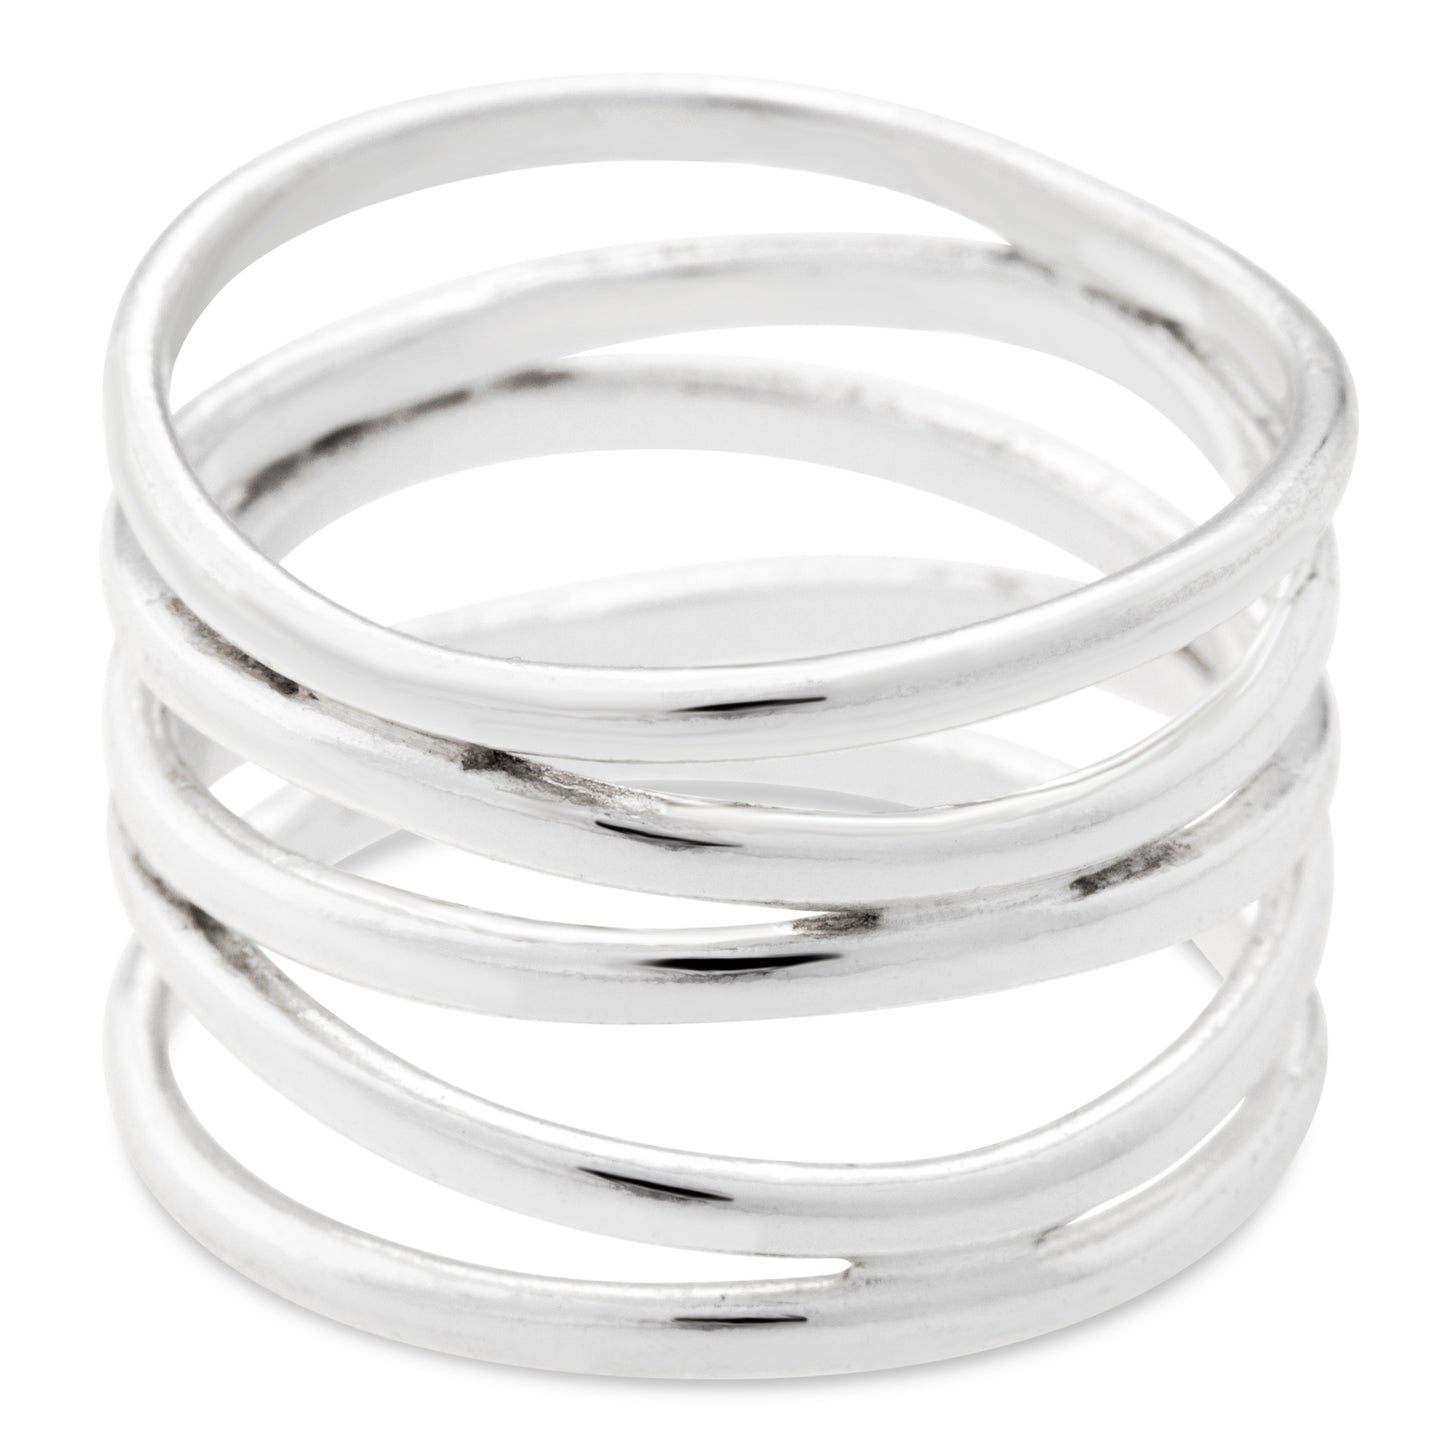 cape cod string ring - 925 sterling silver